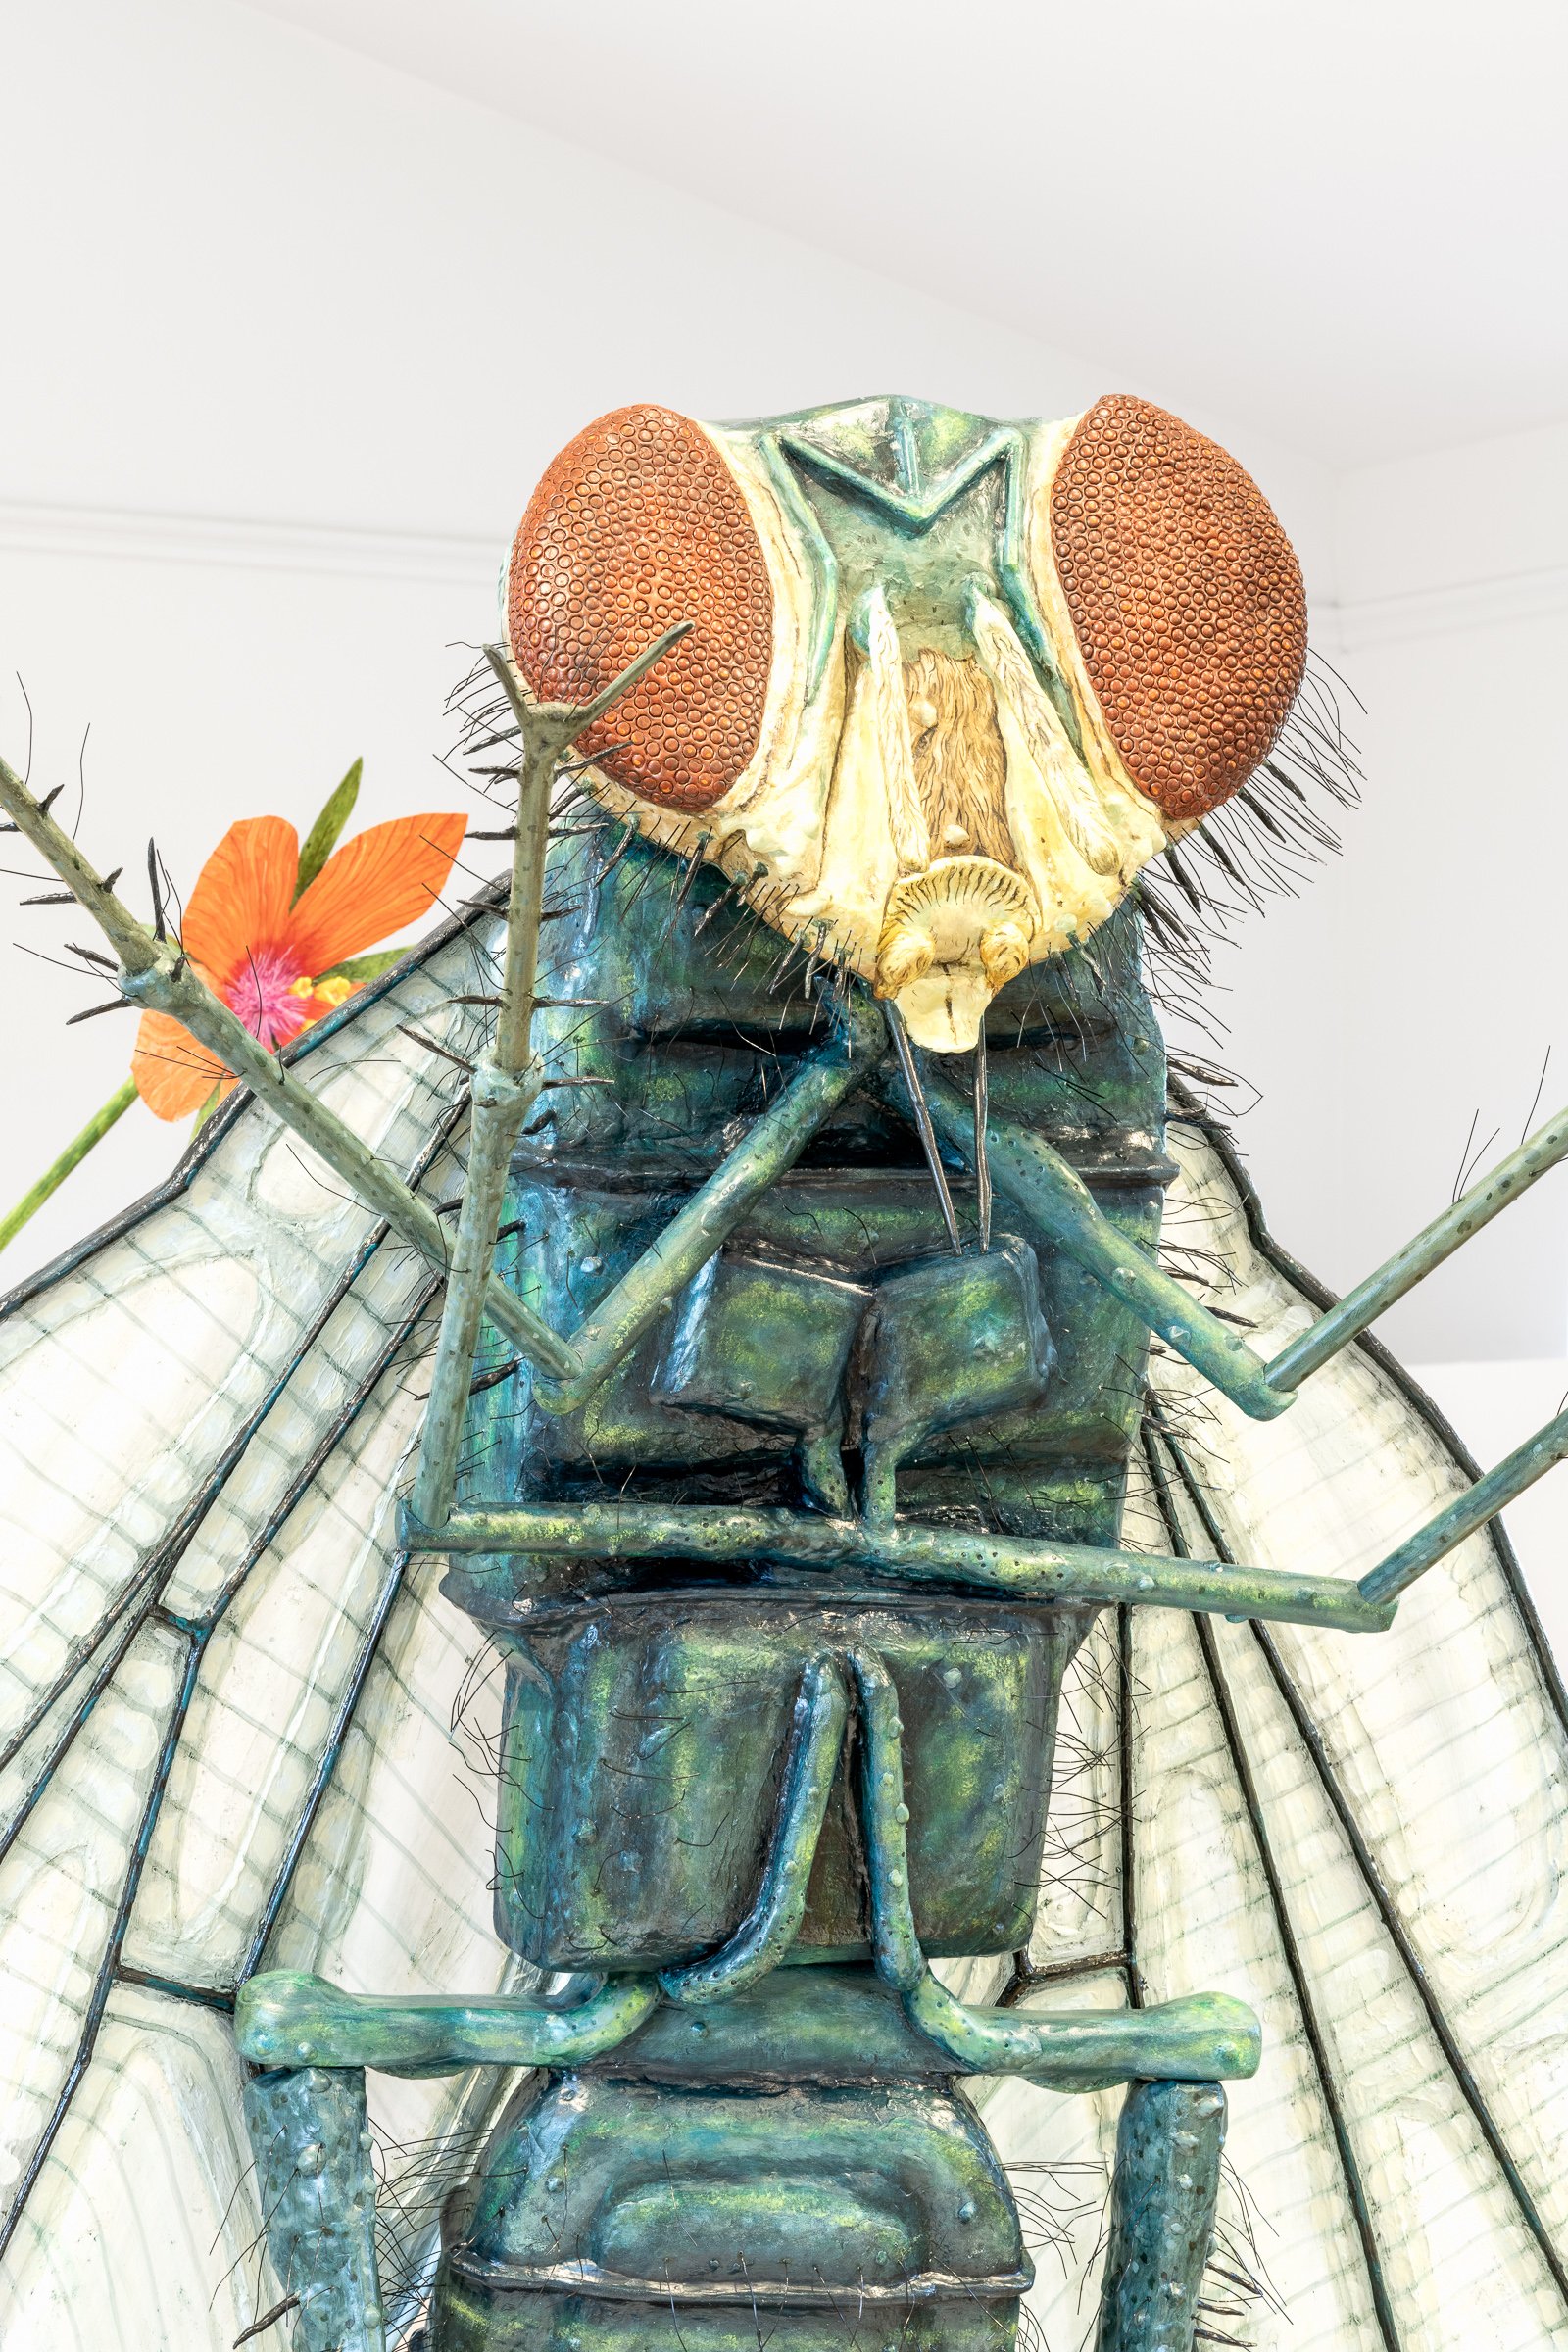   Next World Emissaries: Blue Bottle Fly , wood, papier-mâché, textiles, wire, acrylic, 2021. Courtesy of the artist. Photo by Blaine Campbell. 